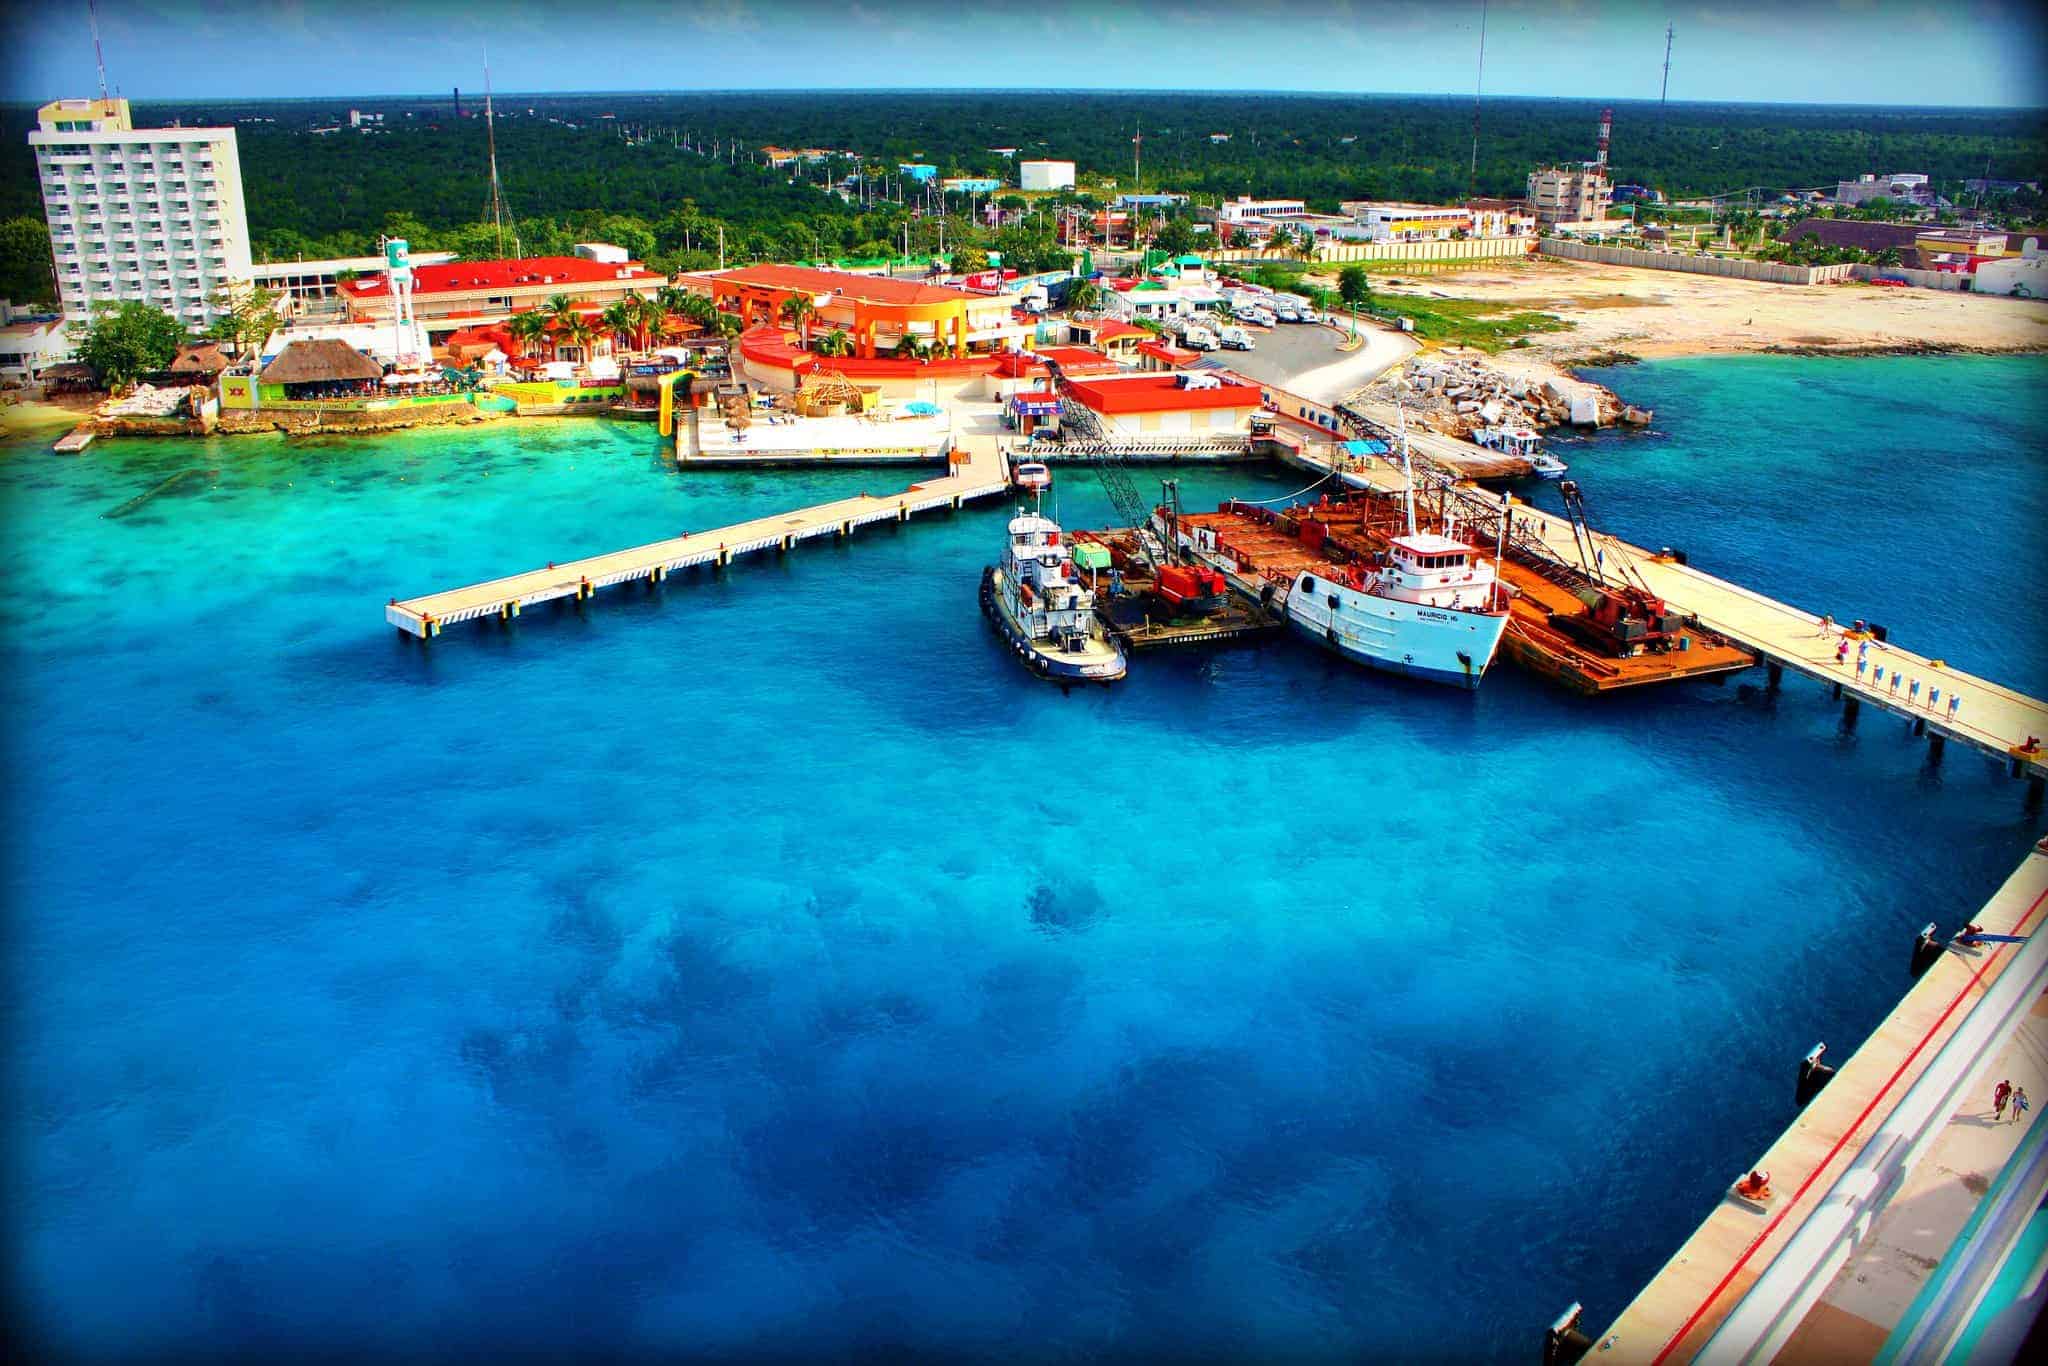 excursions in cozumel today